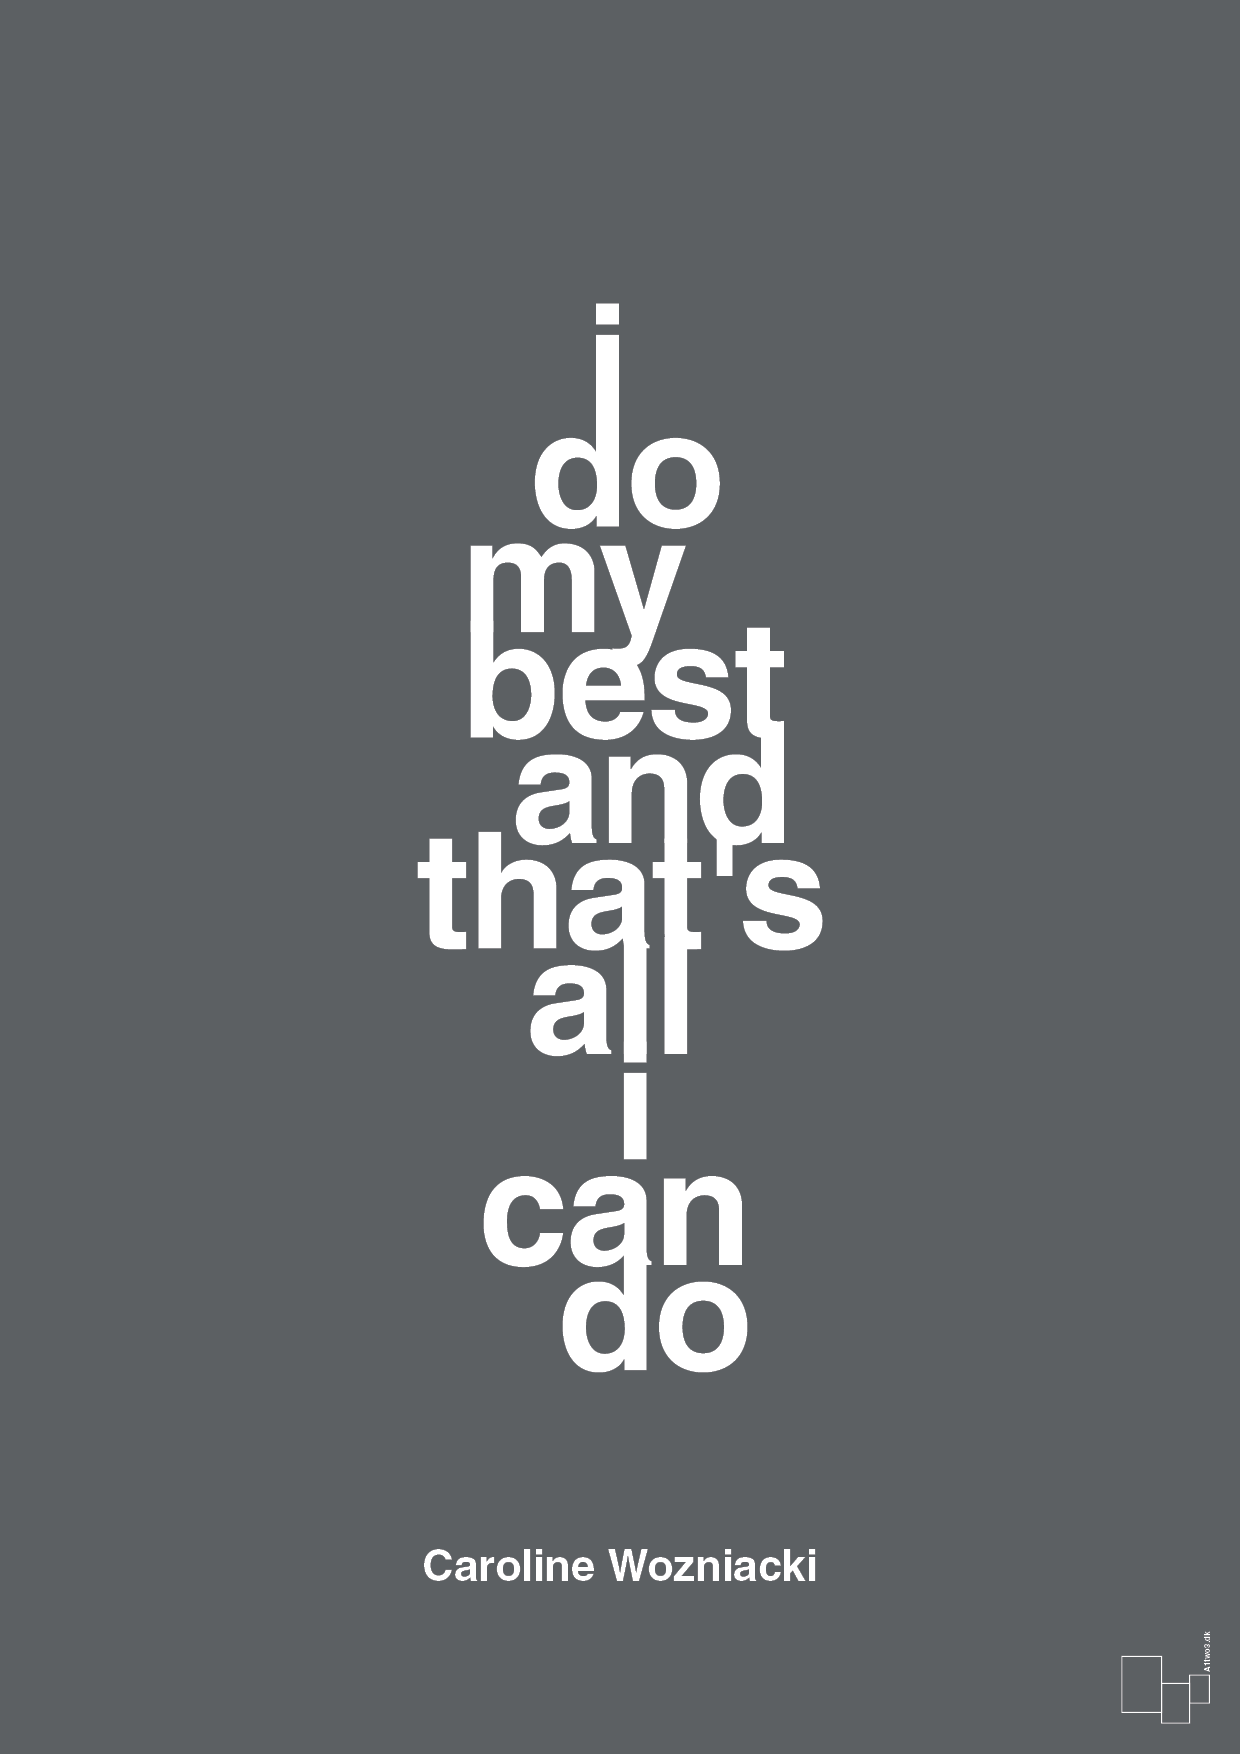 i do my best and that's all i can do - Plakat med Citater i Graphic Charcoal